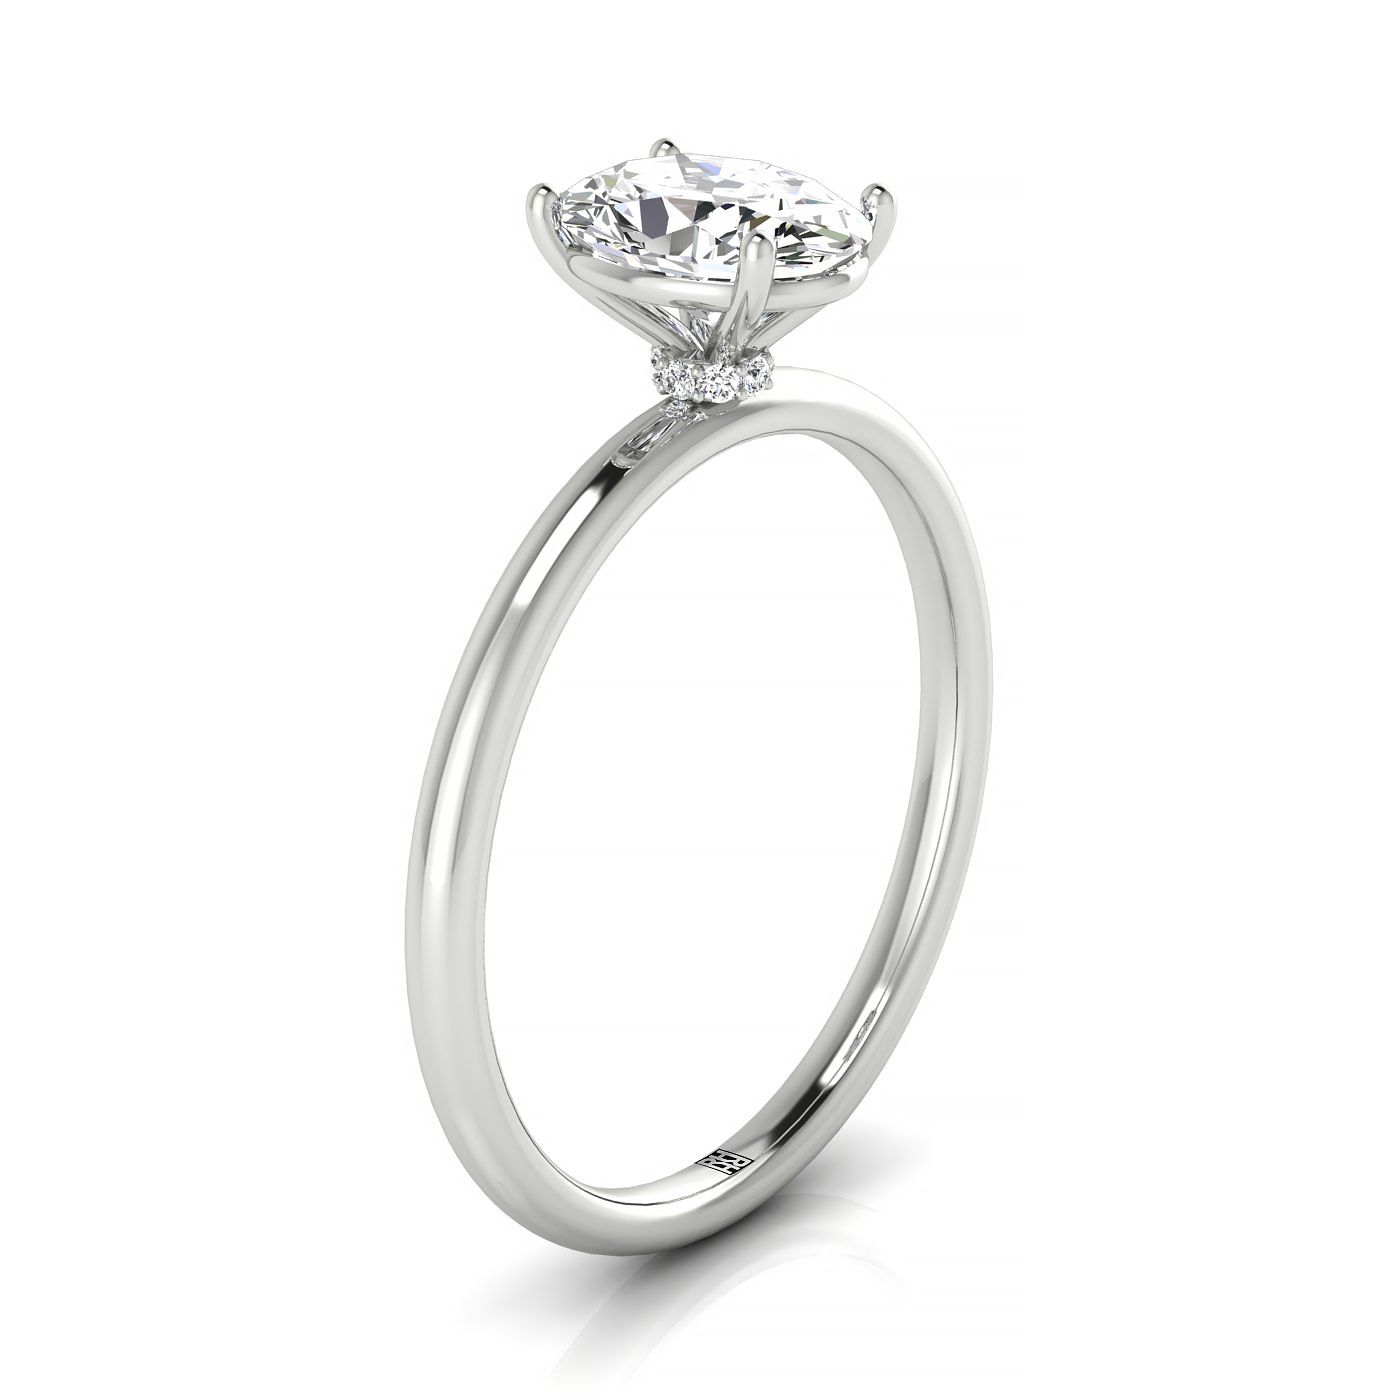 Plat Oval Solitaire Engagement Ring With Hidden Halo With 4 Prong Set Round Diamonds